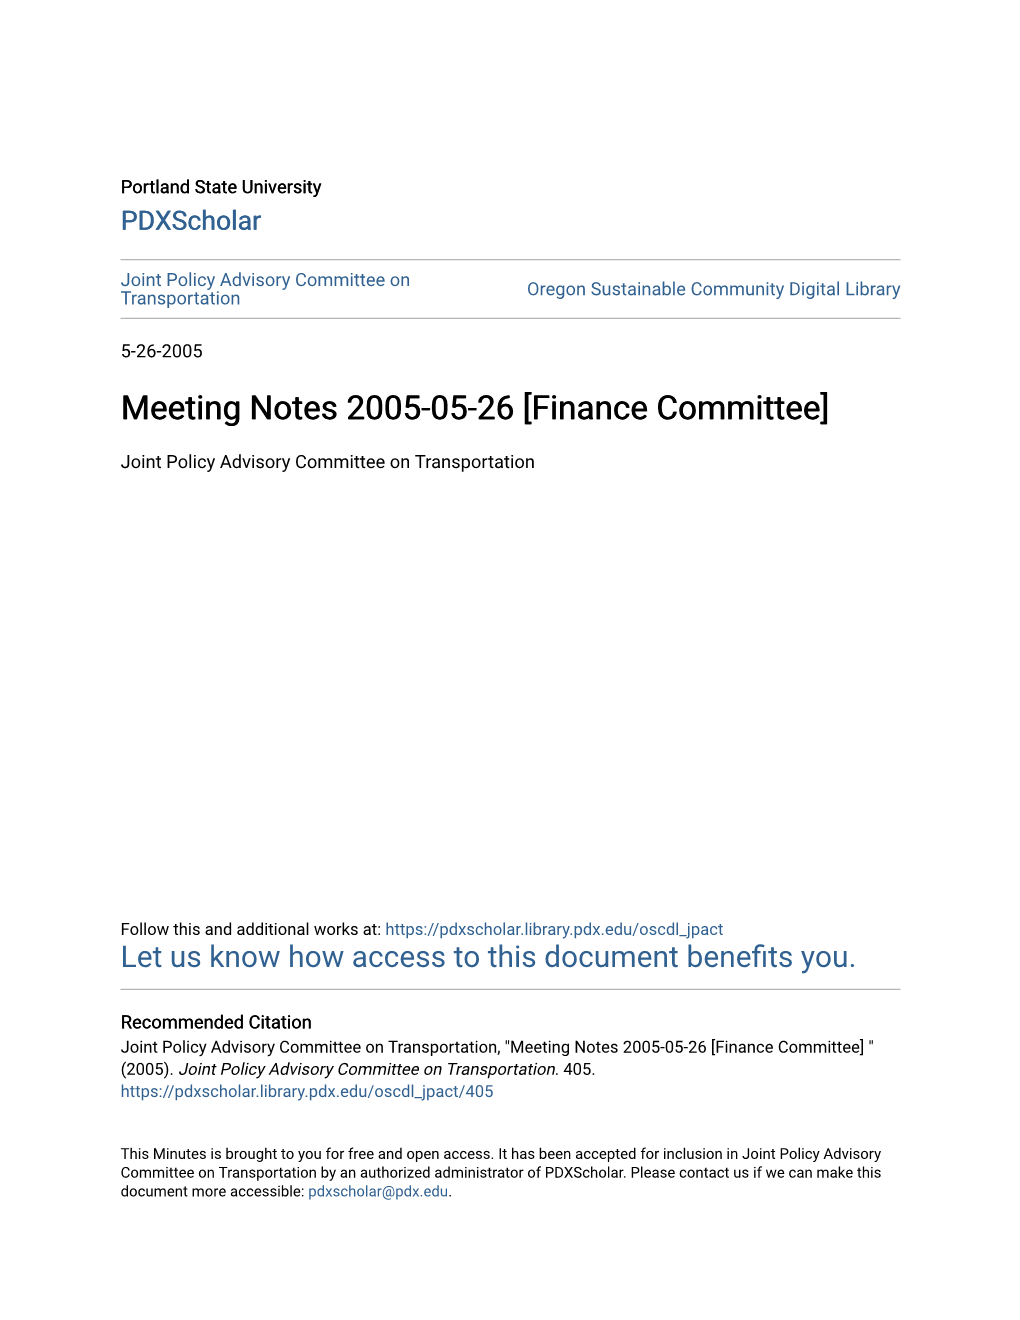 Meeting Notes 2005-05-26 [Finance Committee]